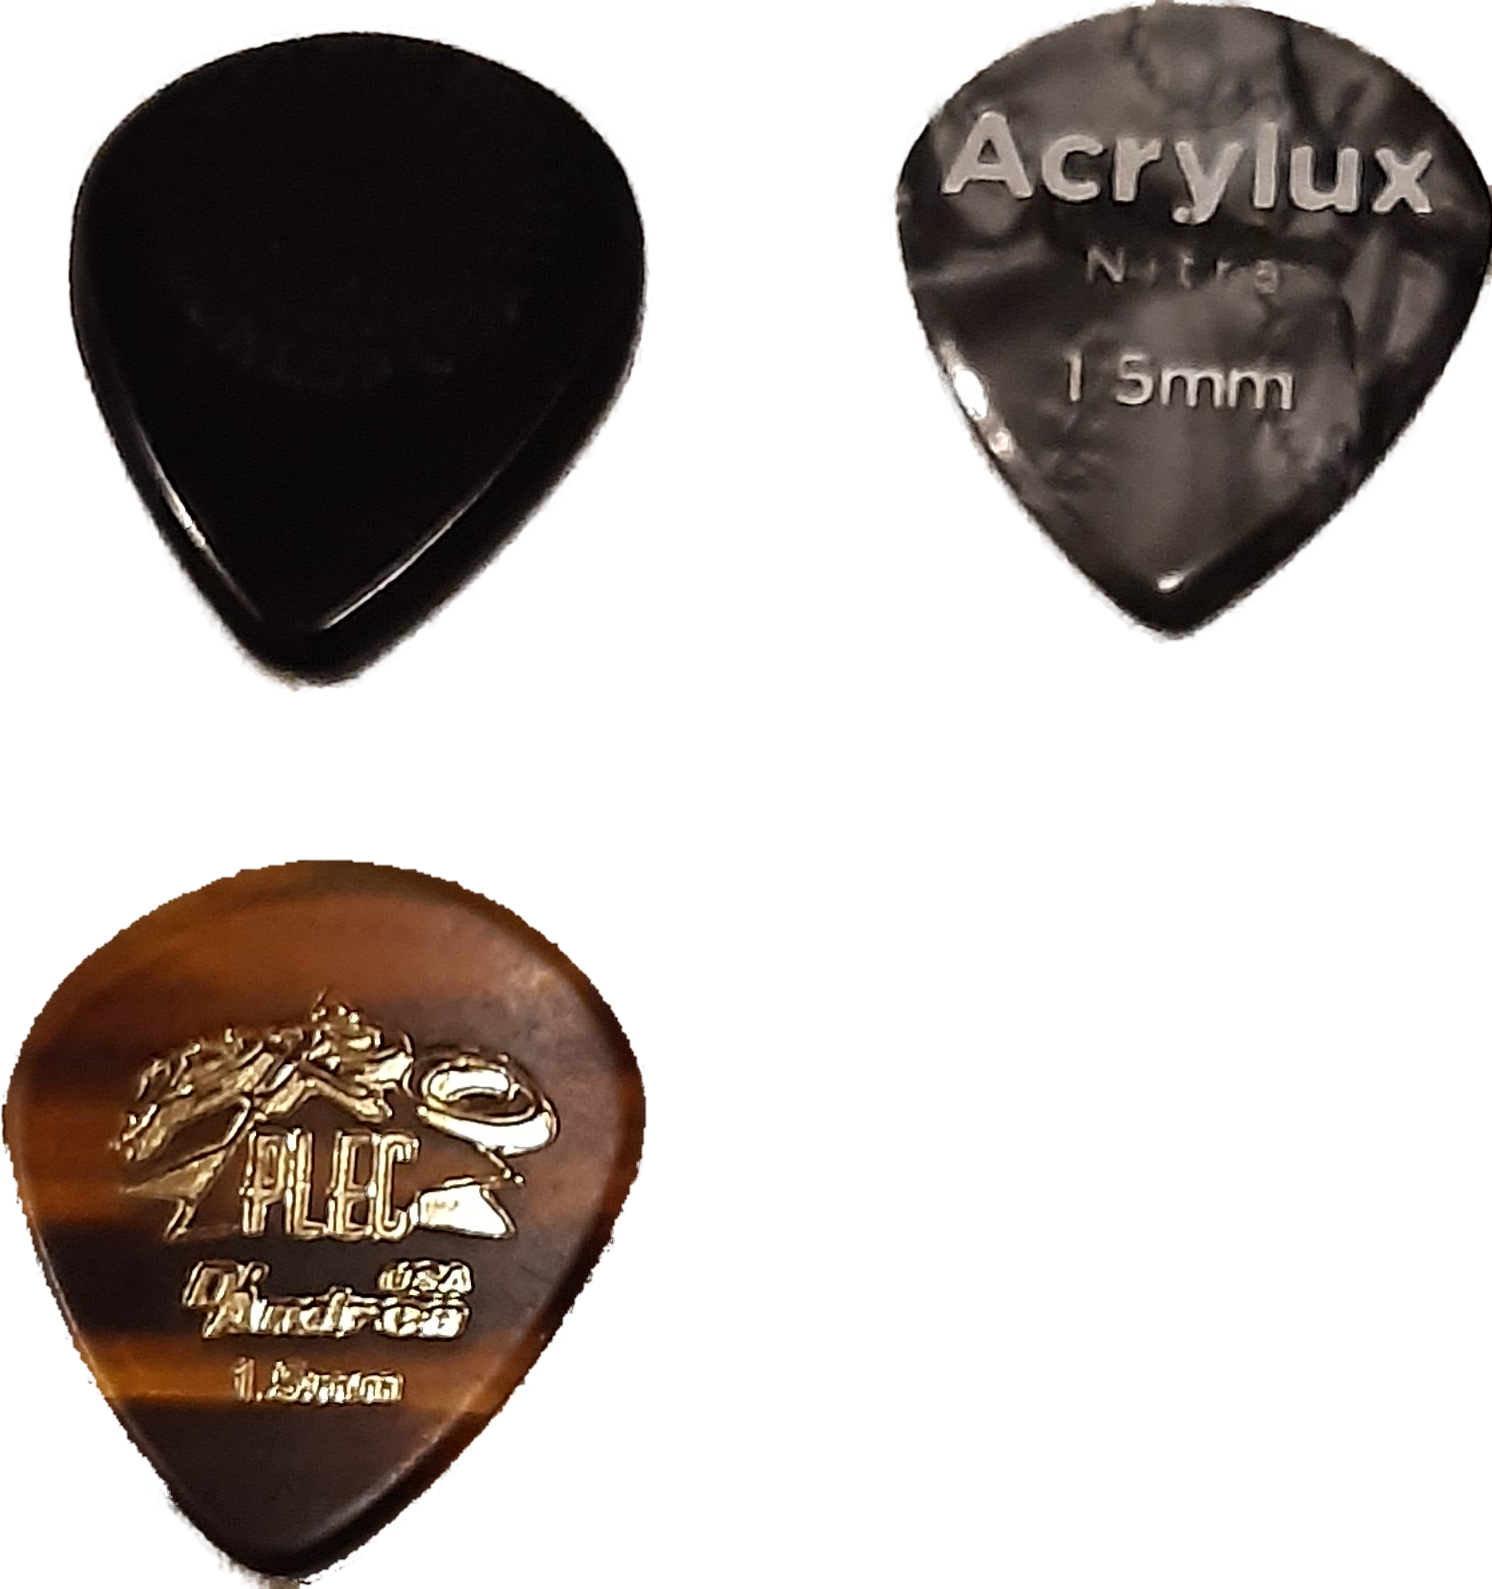 Plectrums for Jazz-20211230_222105-png